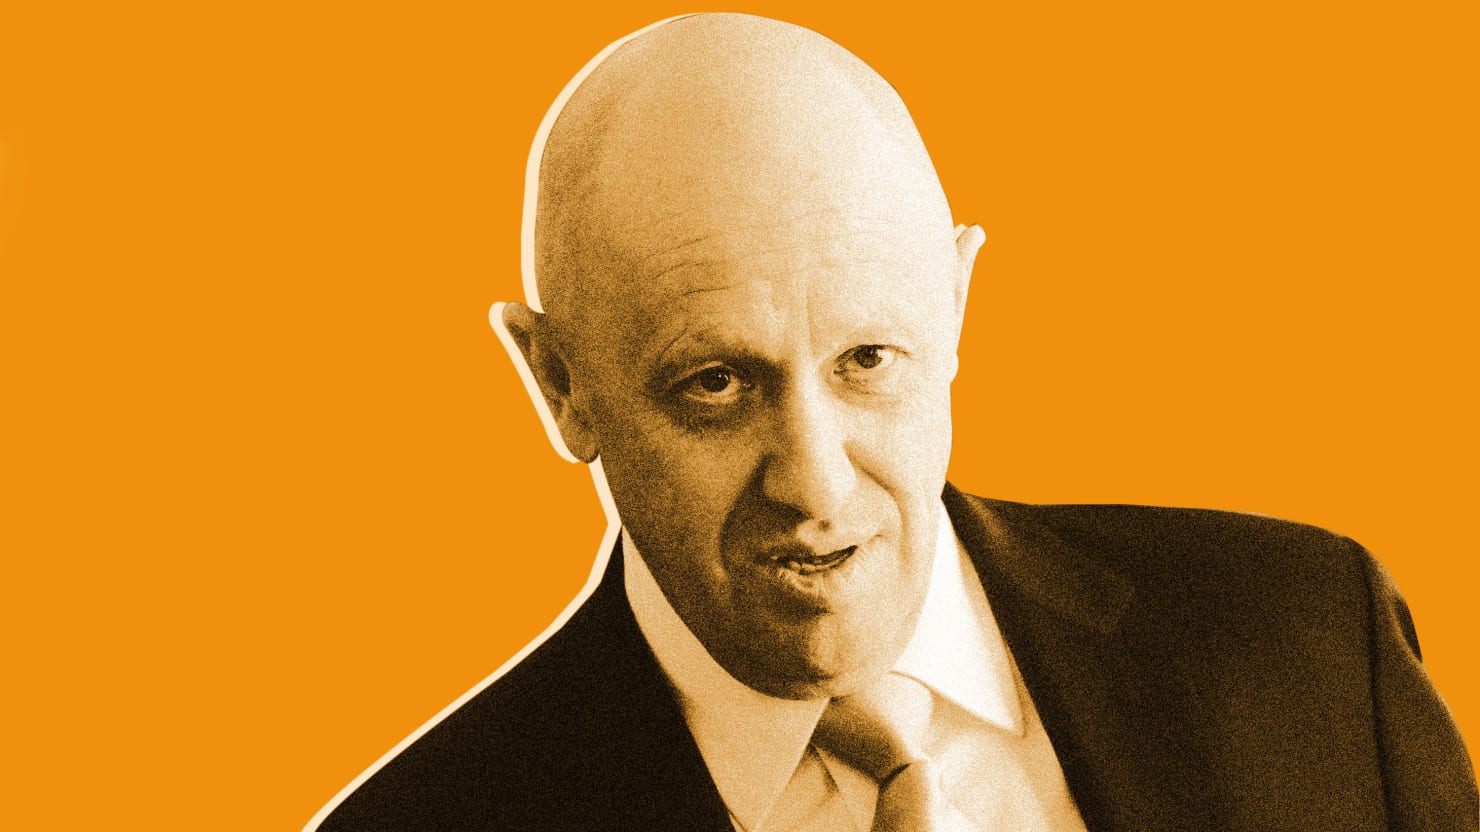 Yevgeny Prigozhin’s Empire at the Center of the CAR Murders Cold Case